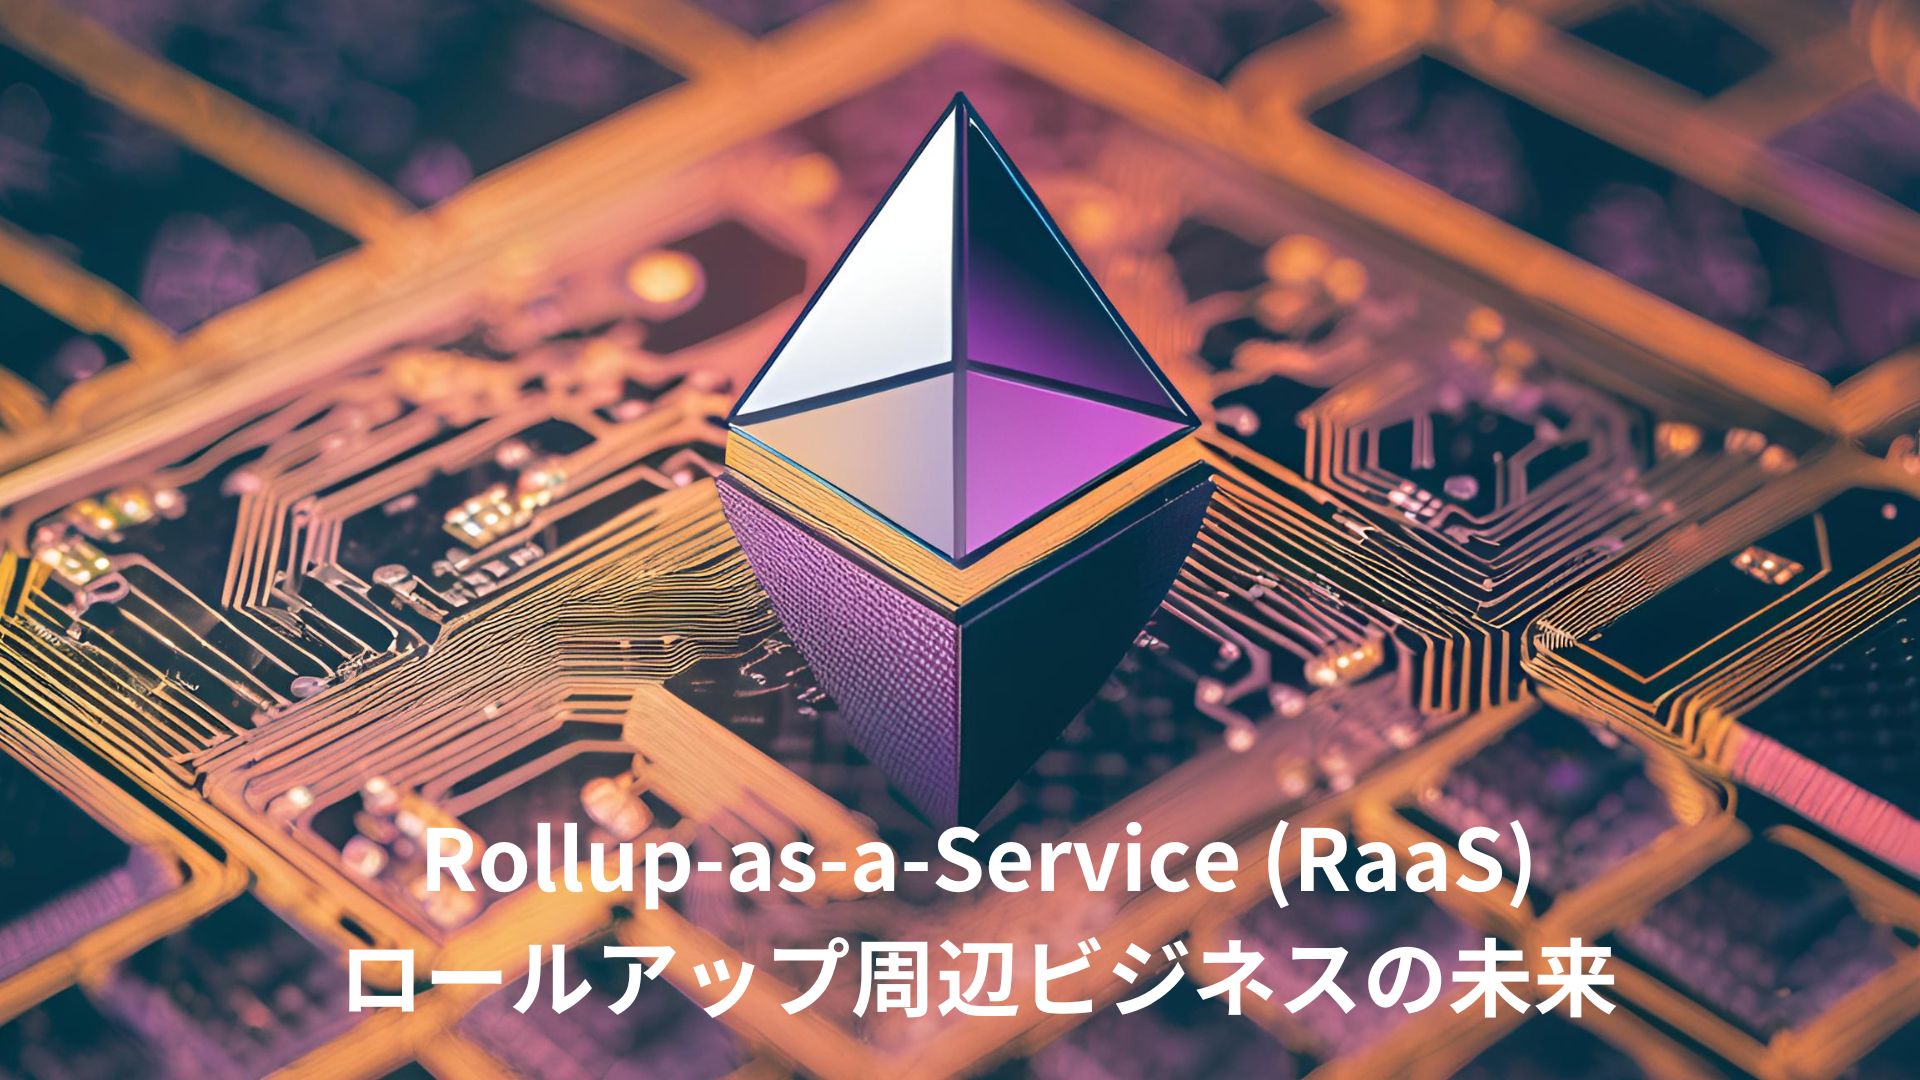 Rollup-as-a-Service (RaaS)の事業性とロールアップ周辺ビジネスの未来